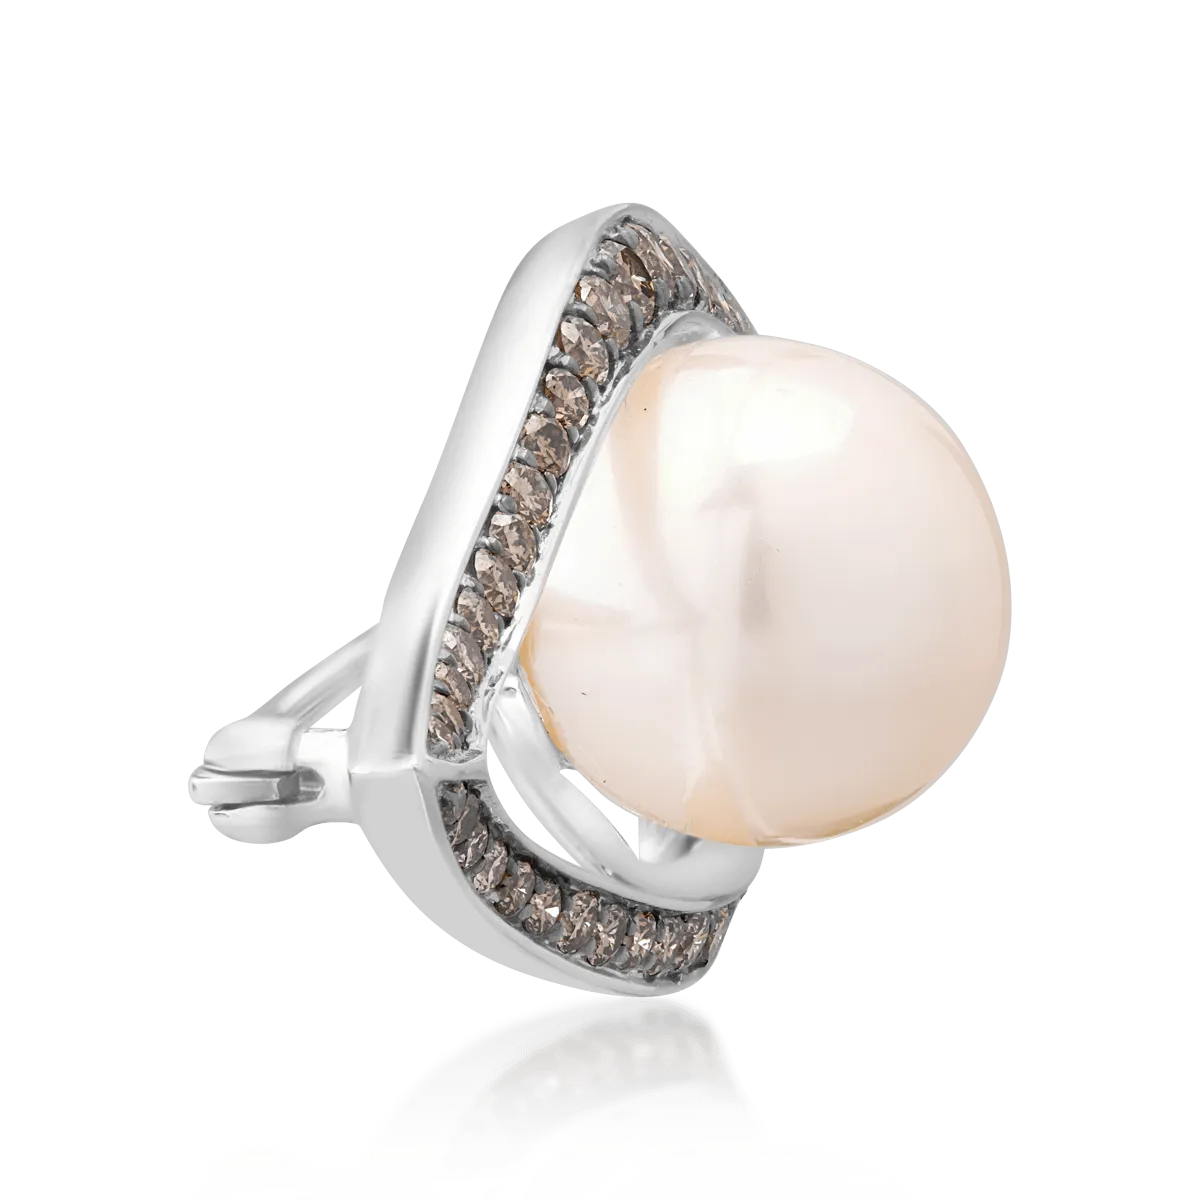 18K white gold brooch with 1ct freshwater cultured pearl and 0.77ct brown diamonds